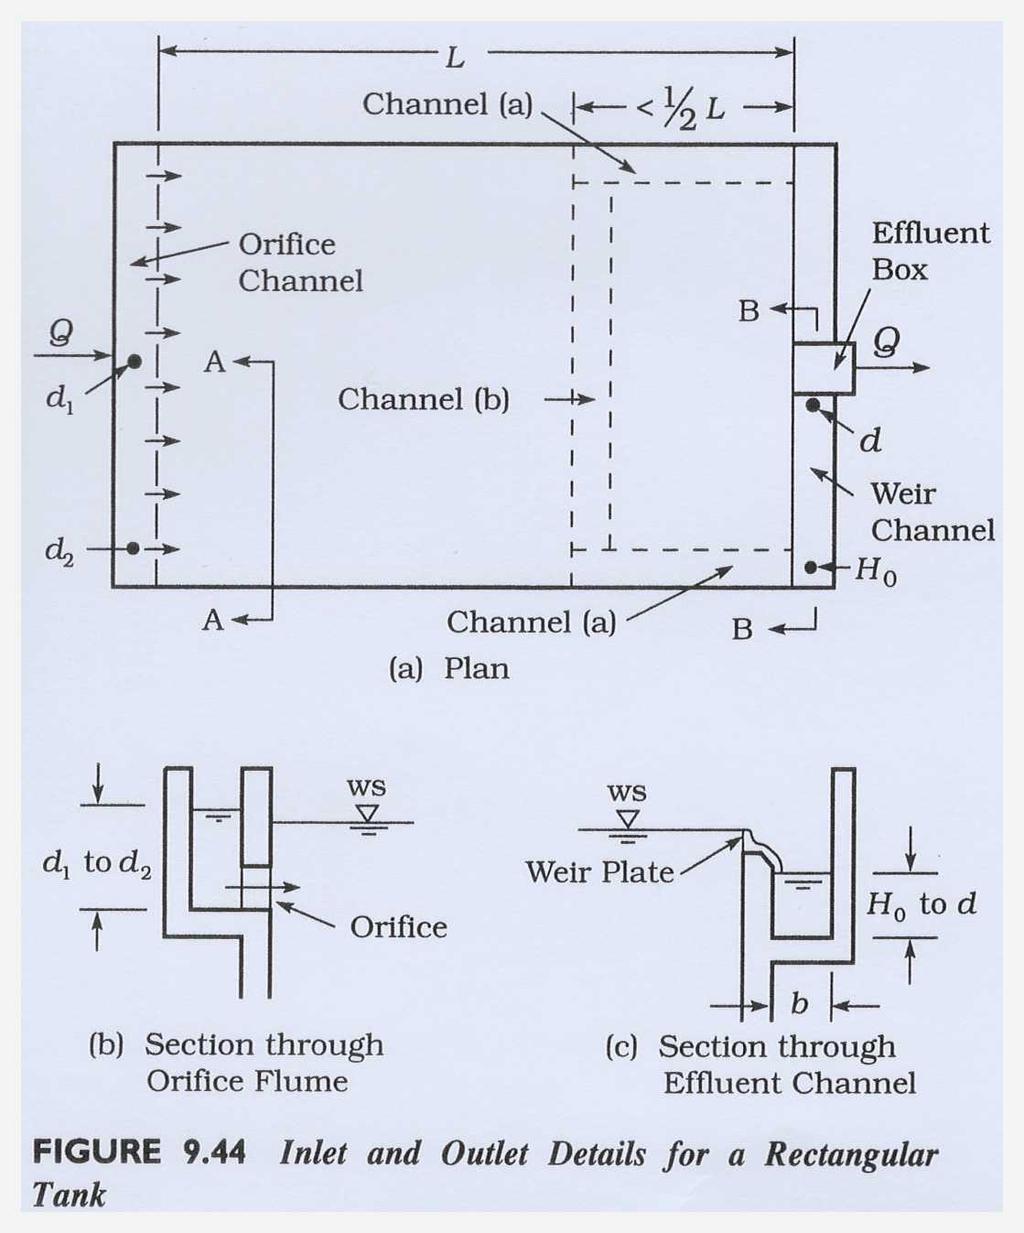 Inlet and outlet